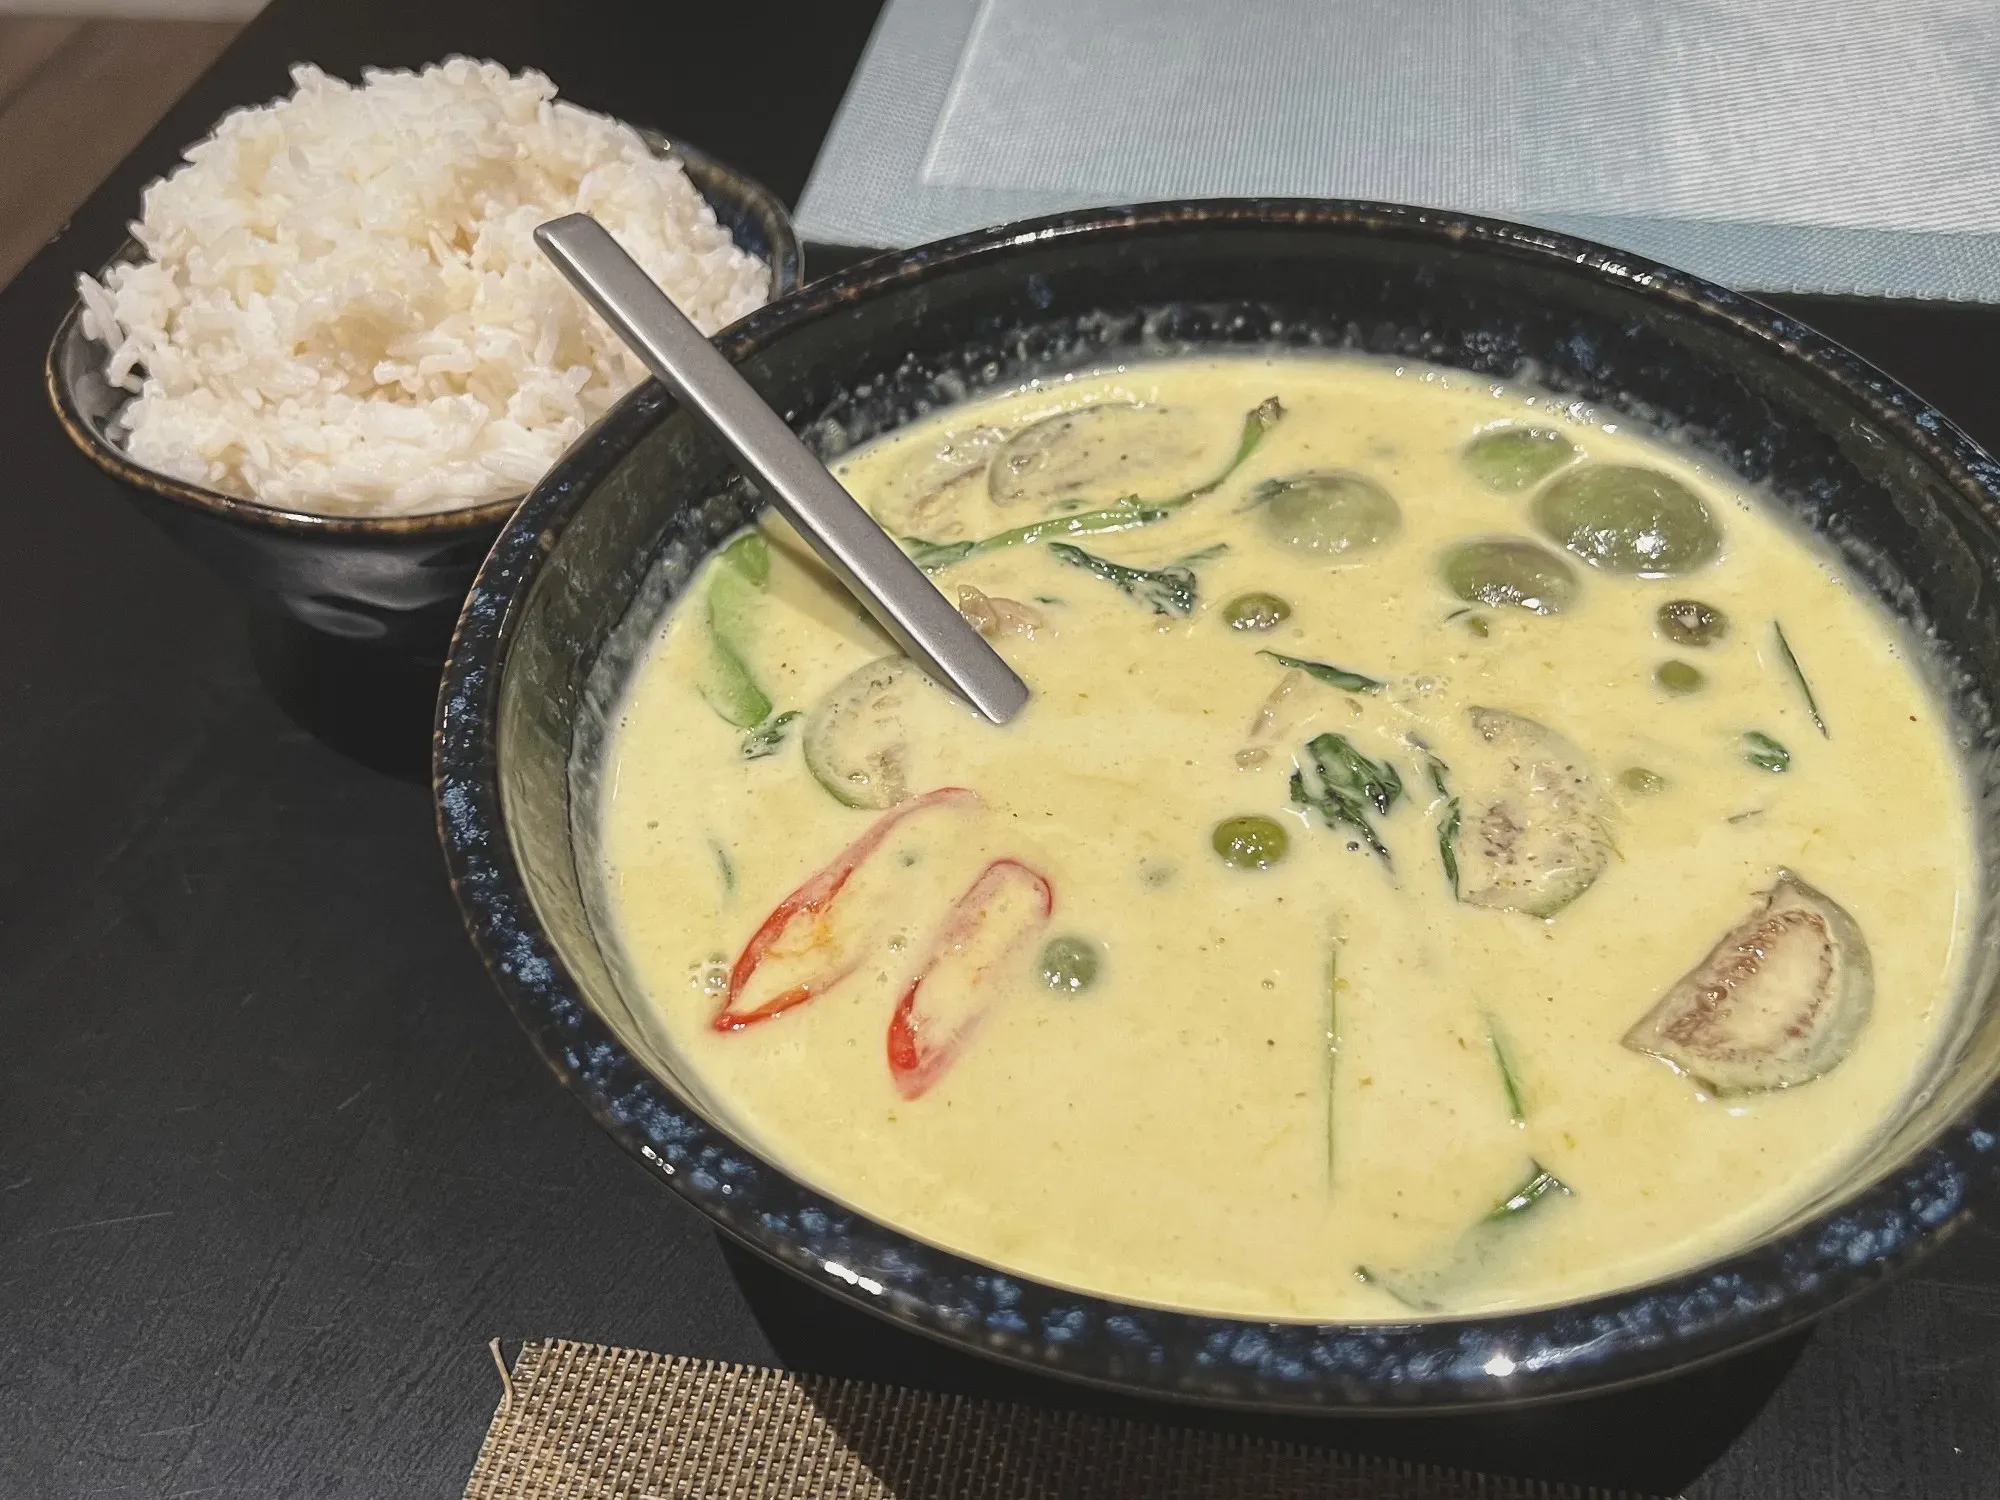 Green Curry with rice in the background.